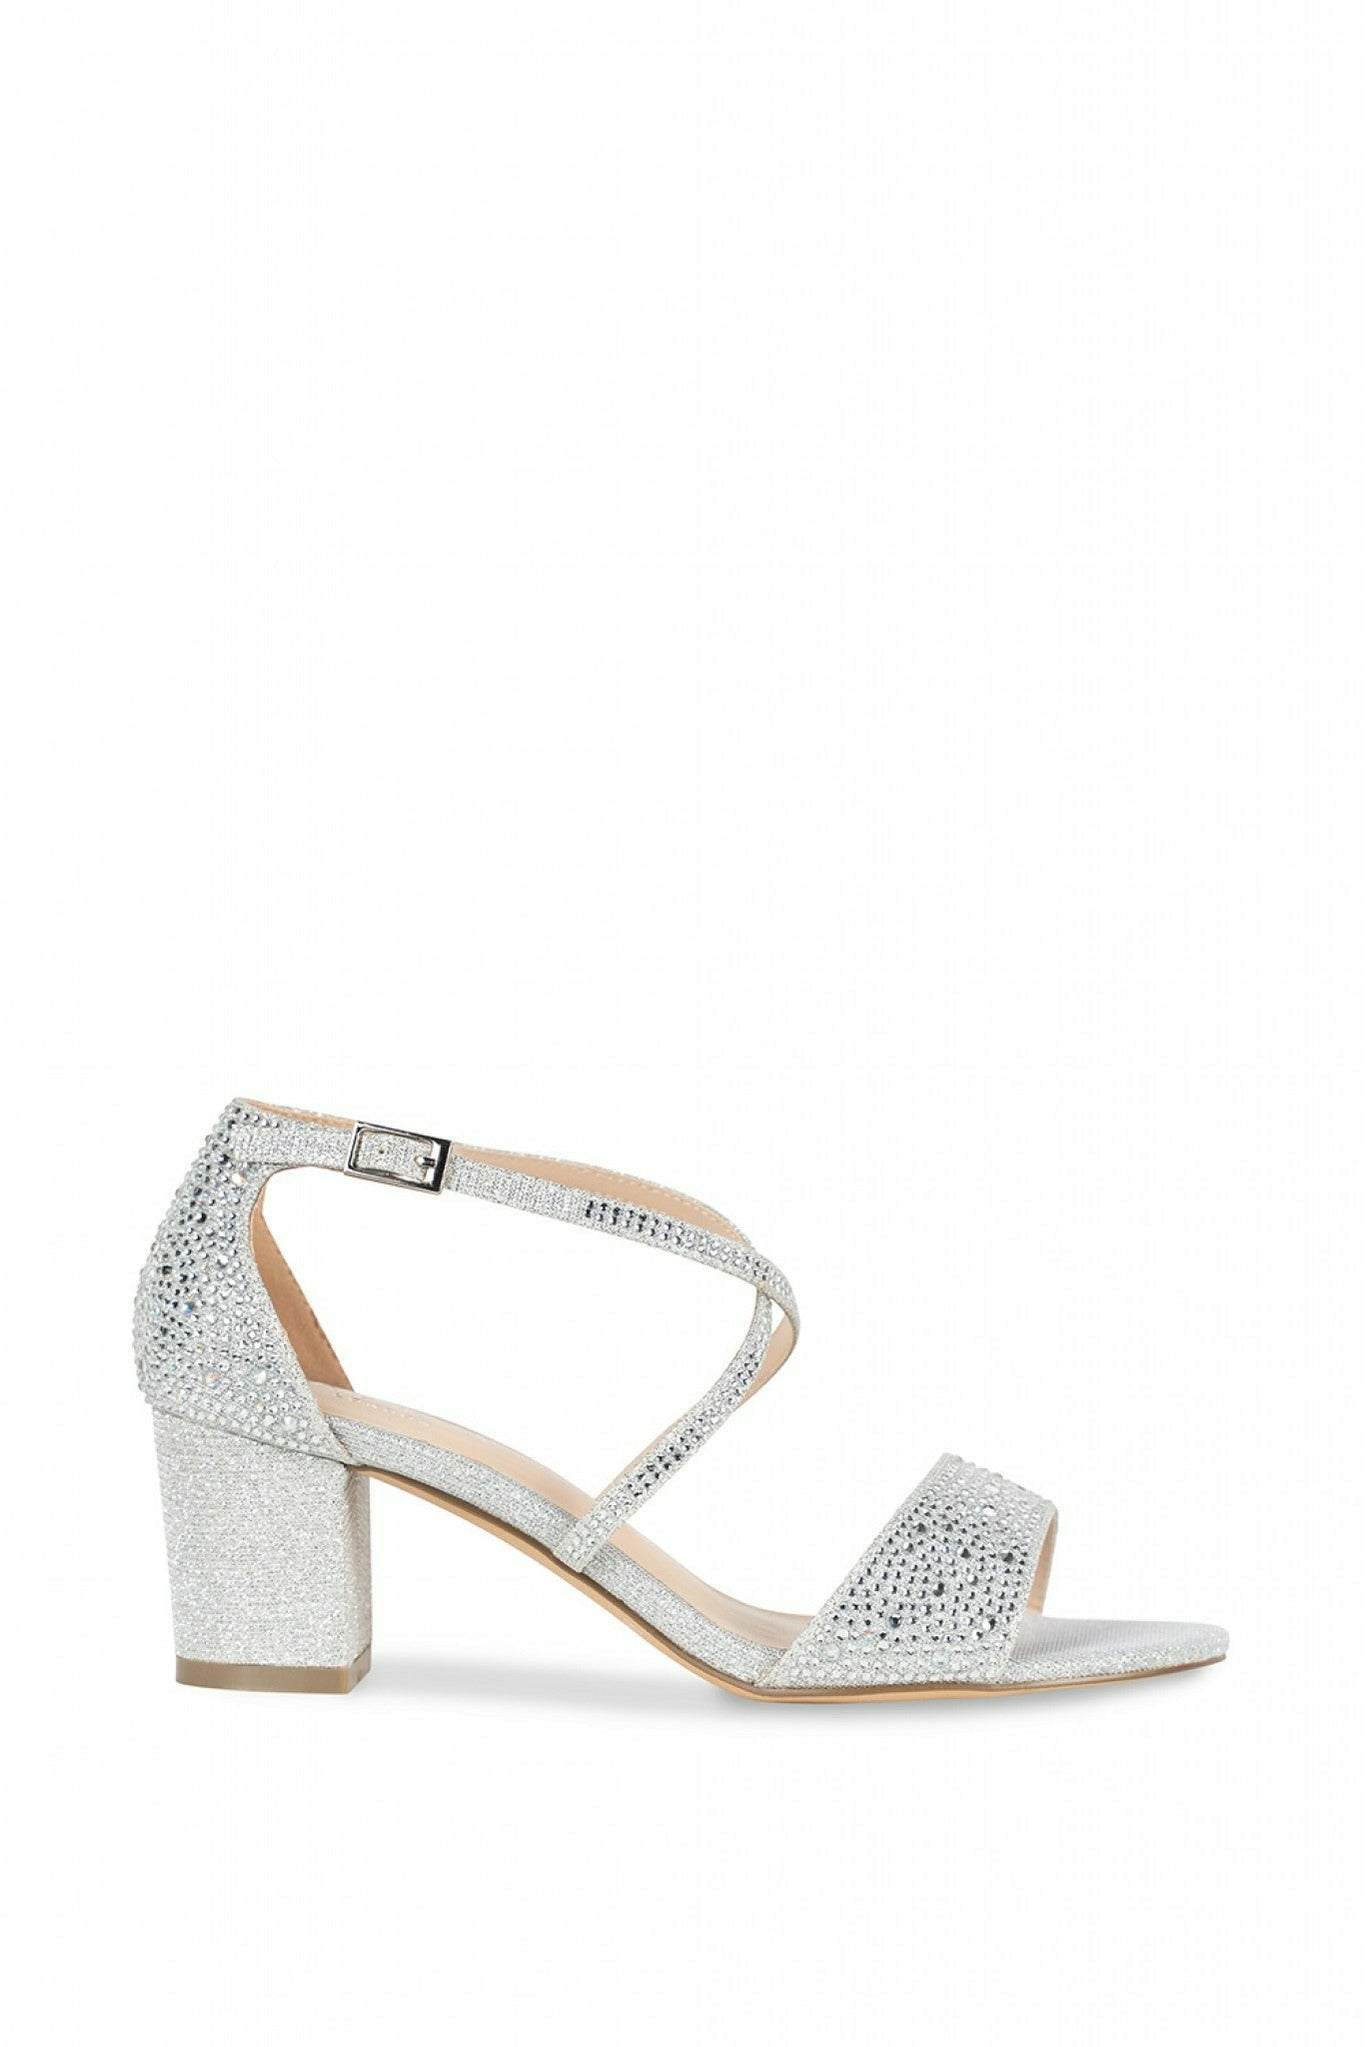 Paradox London Ines - Silver Glitter Mid Block Heel Ankle Strap Sandals ...